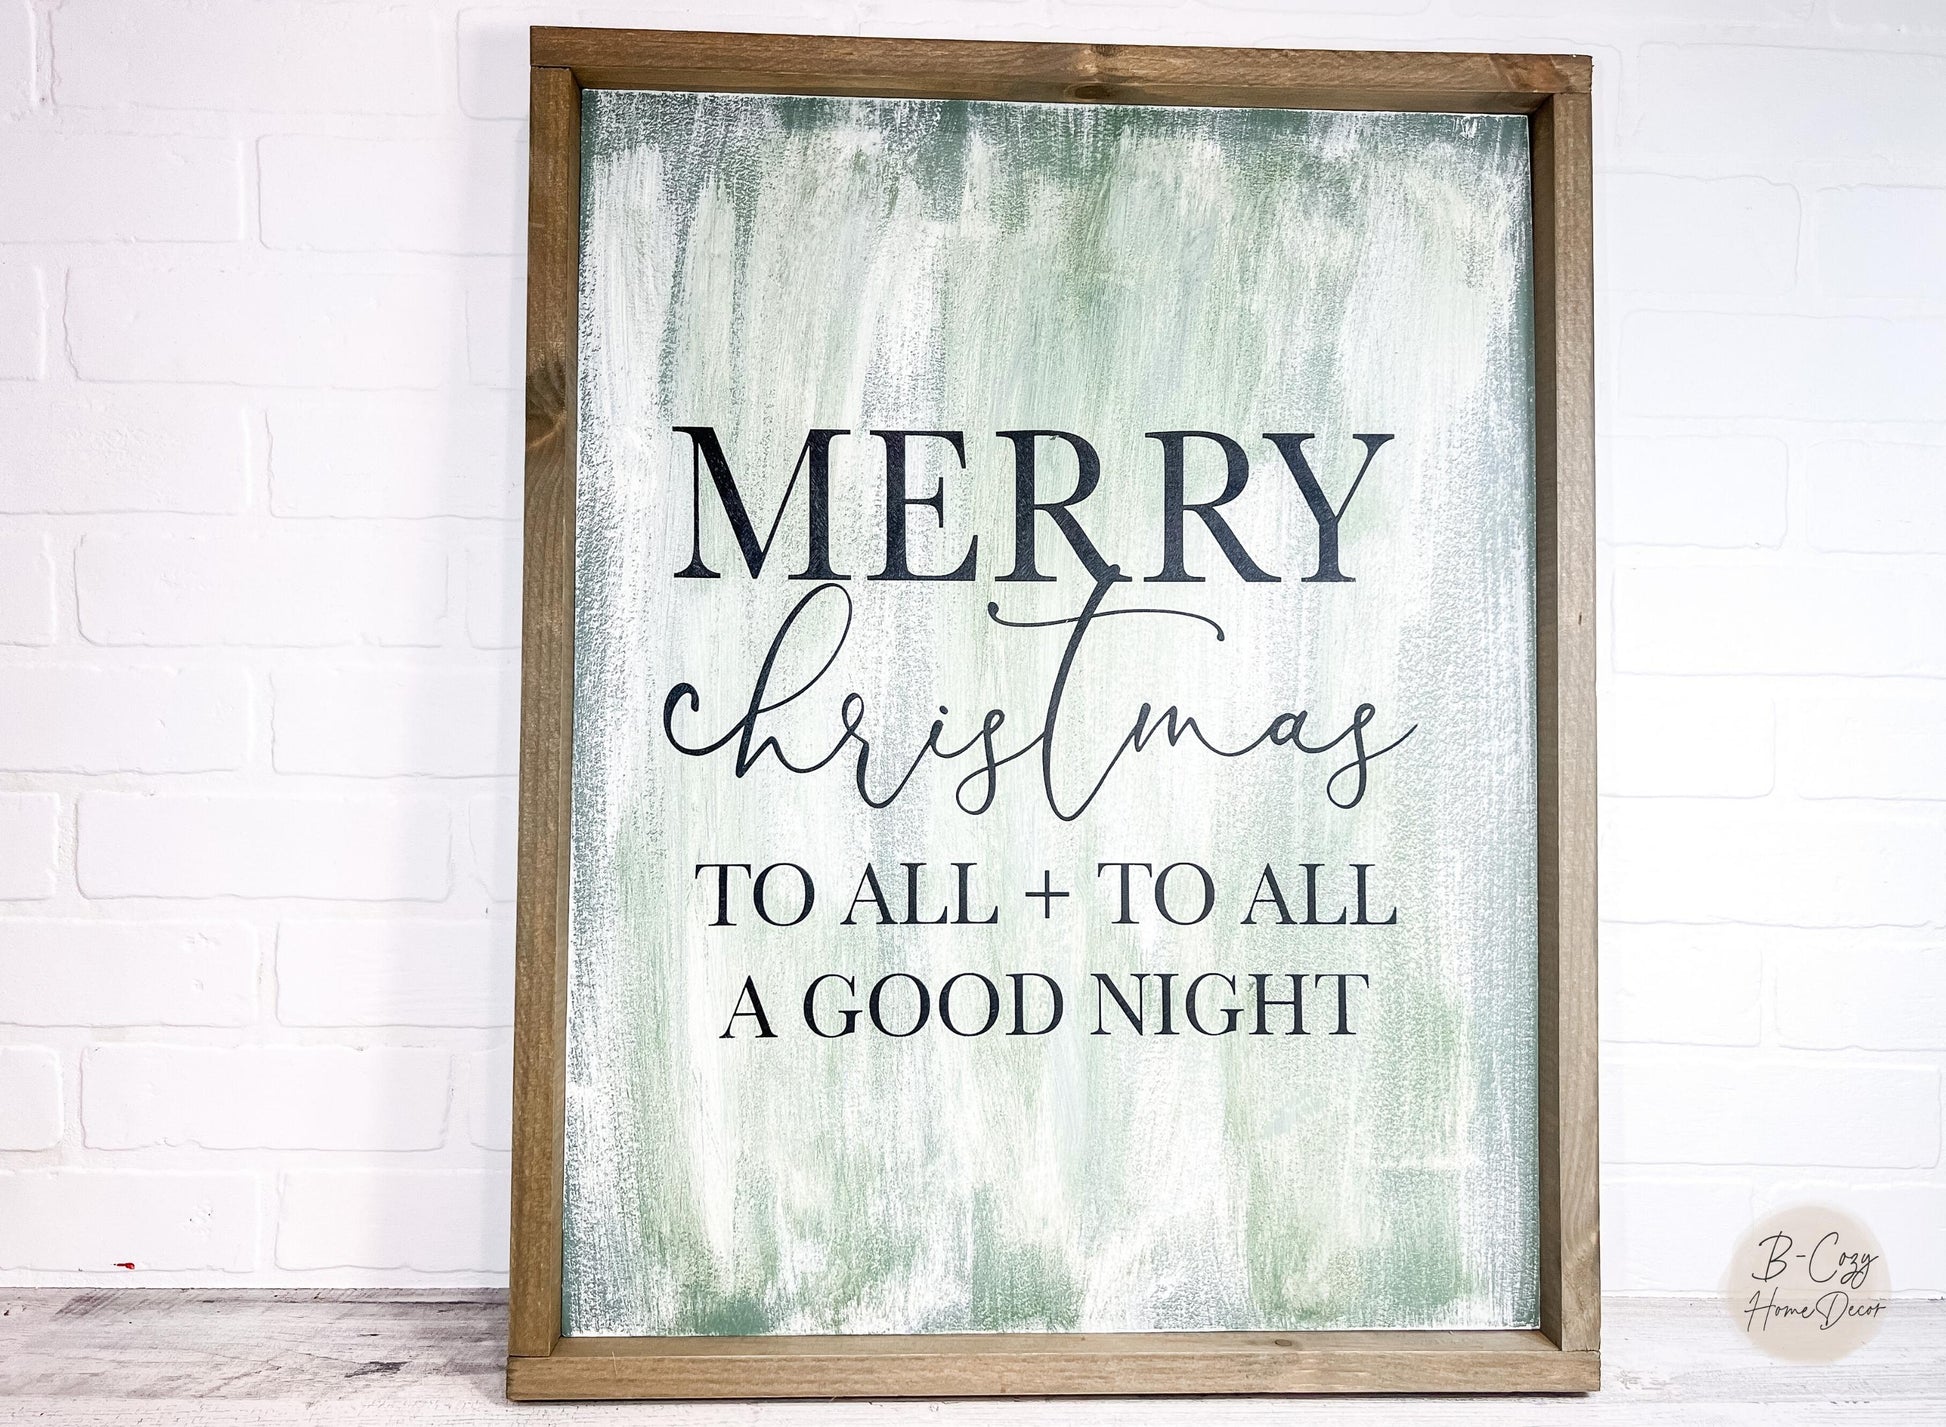 Merry Christmas And To All A Goodnight - B-Cozy Home Decor